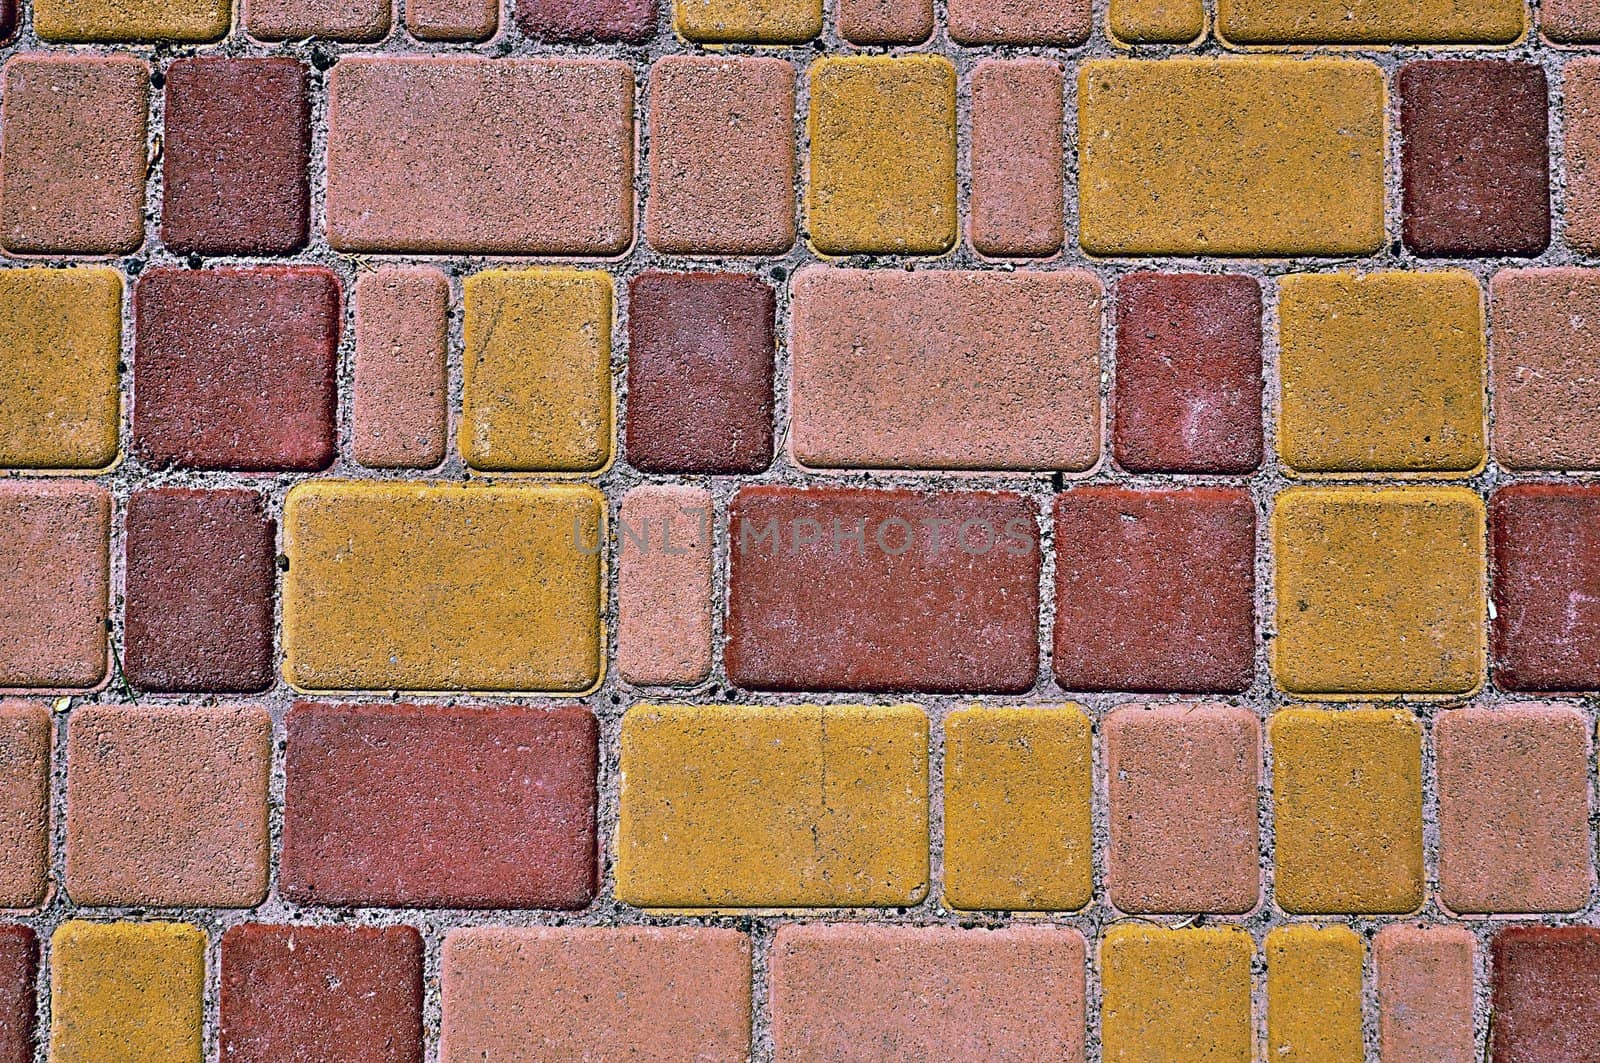 Background - color bricks of a roadway close up